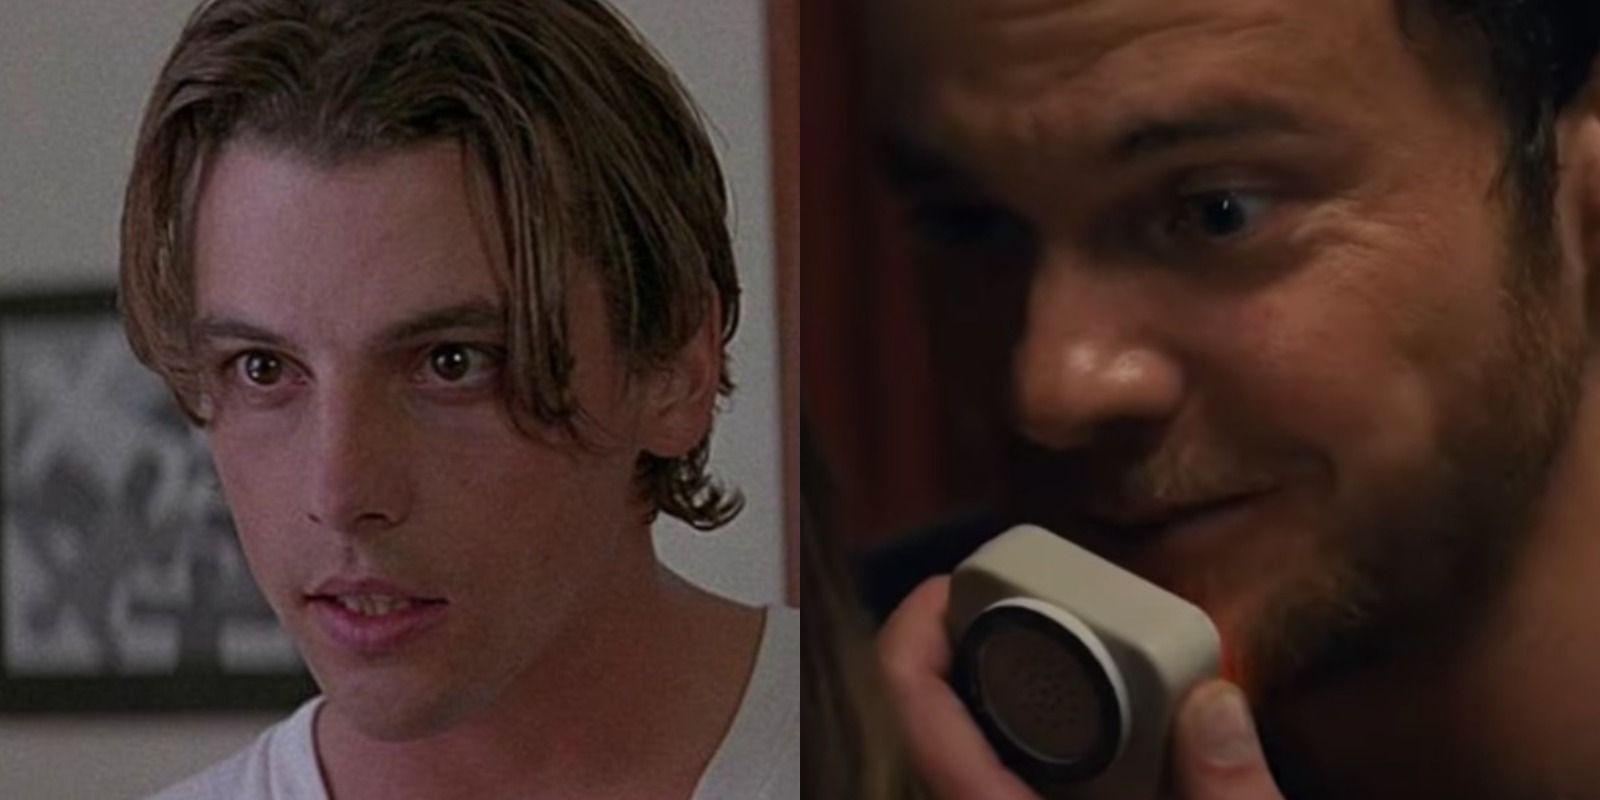 Split image featuring Billy Loomis on the left and Richie Kirsch on the right in the Scream franchise